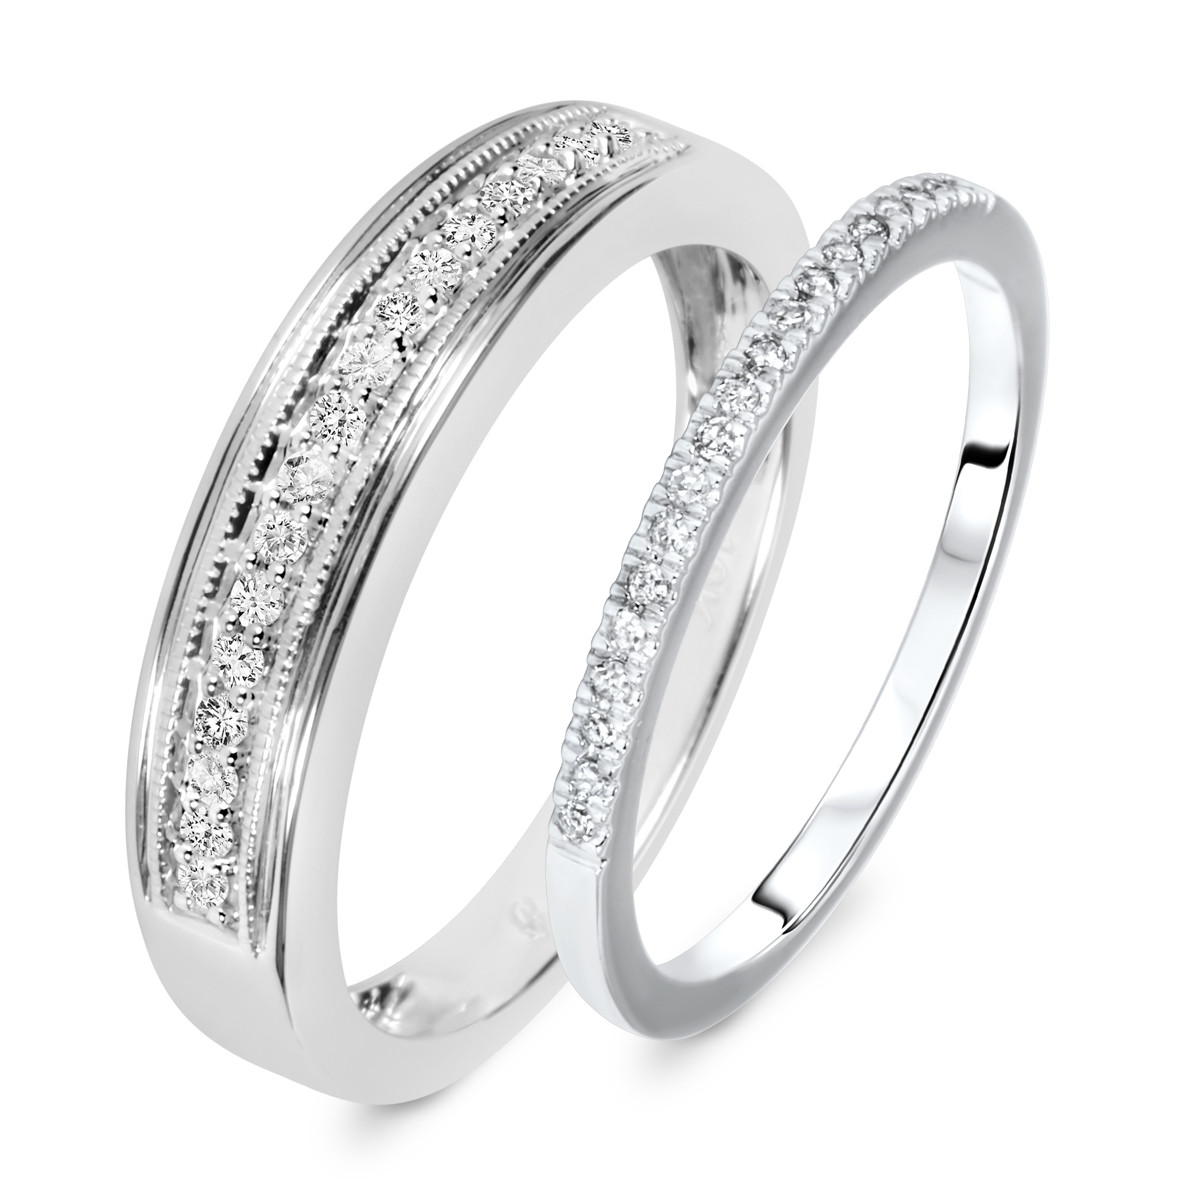 Wedding Band Sets His And Hers
 1 4 Carat T W Round Cut Diamond His And Hers Wedding Band